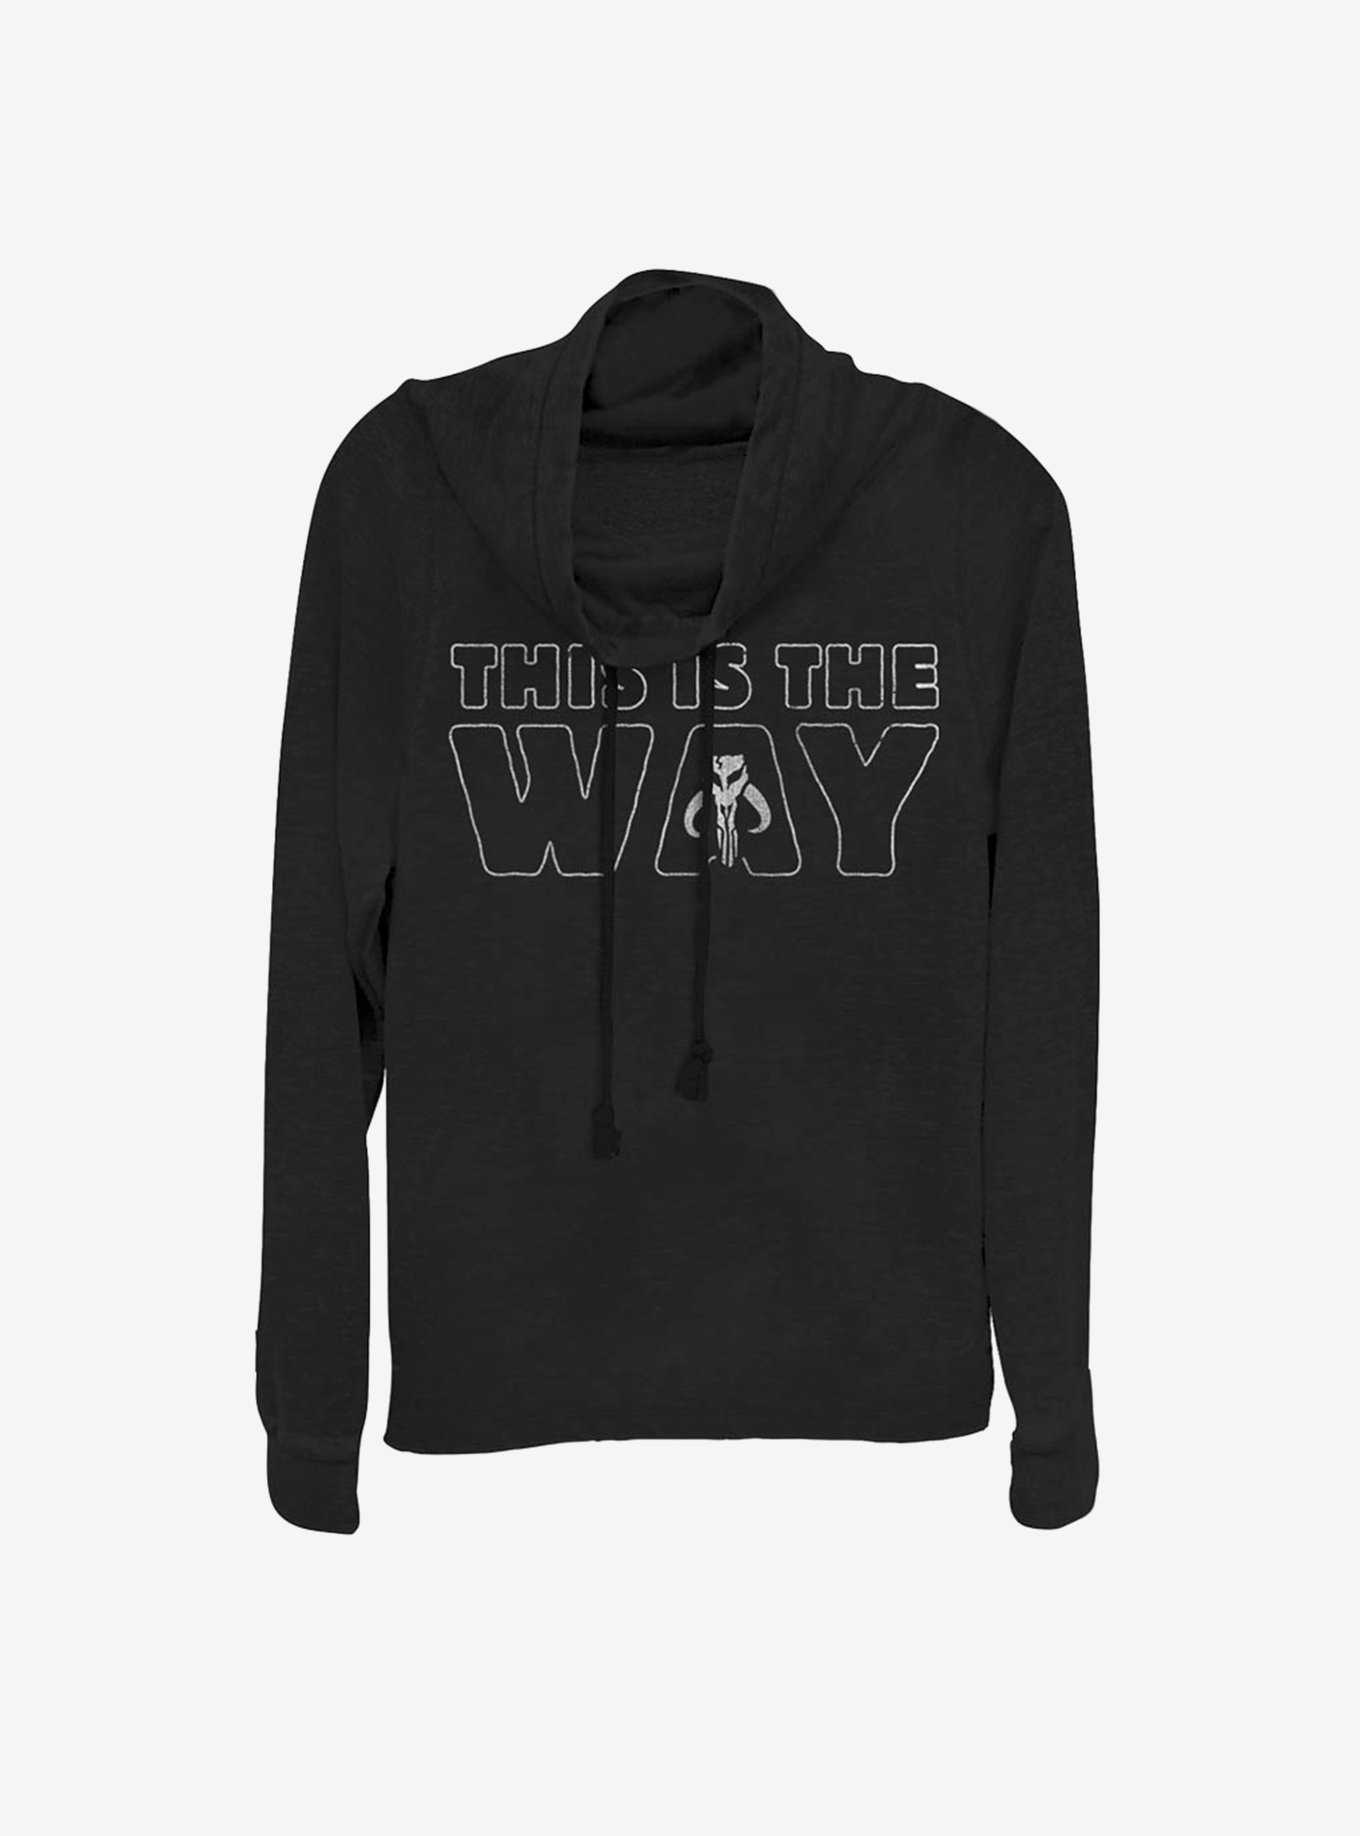 Star Wars The Mandalorian This Is The Way Outline Cowlneck Long-Sleeve Womens Top, , hi-res